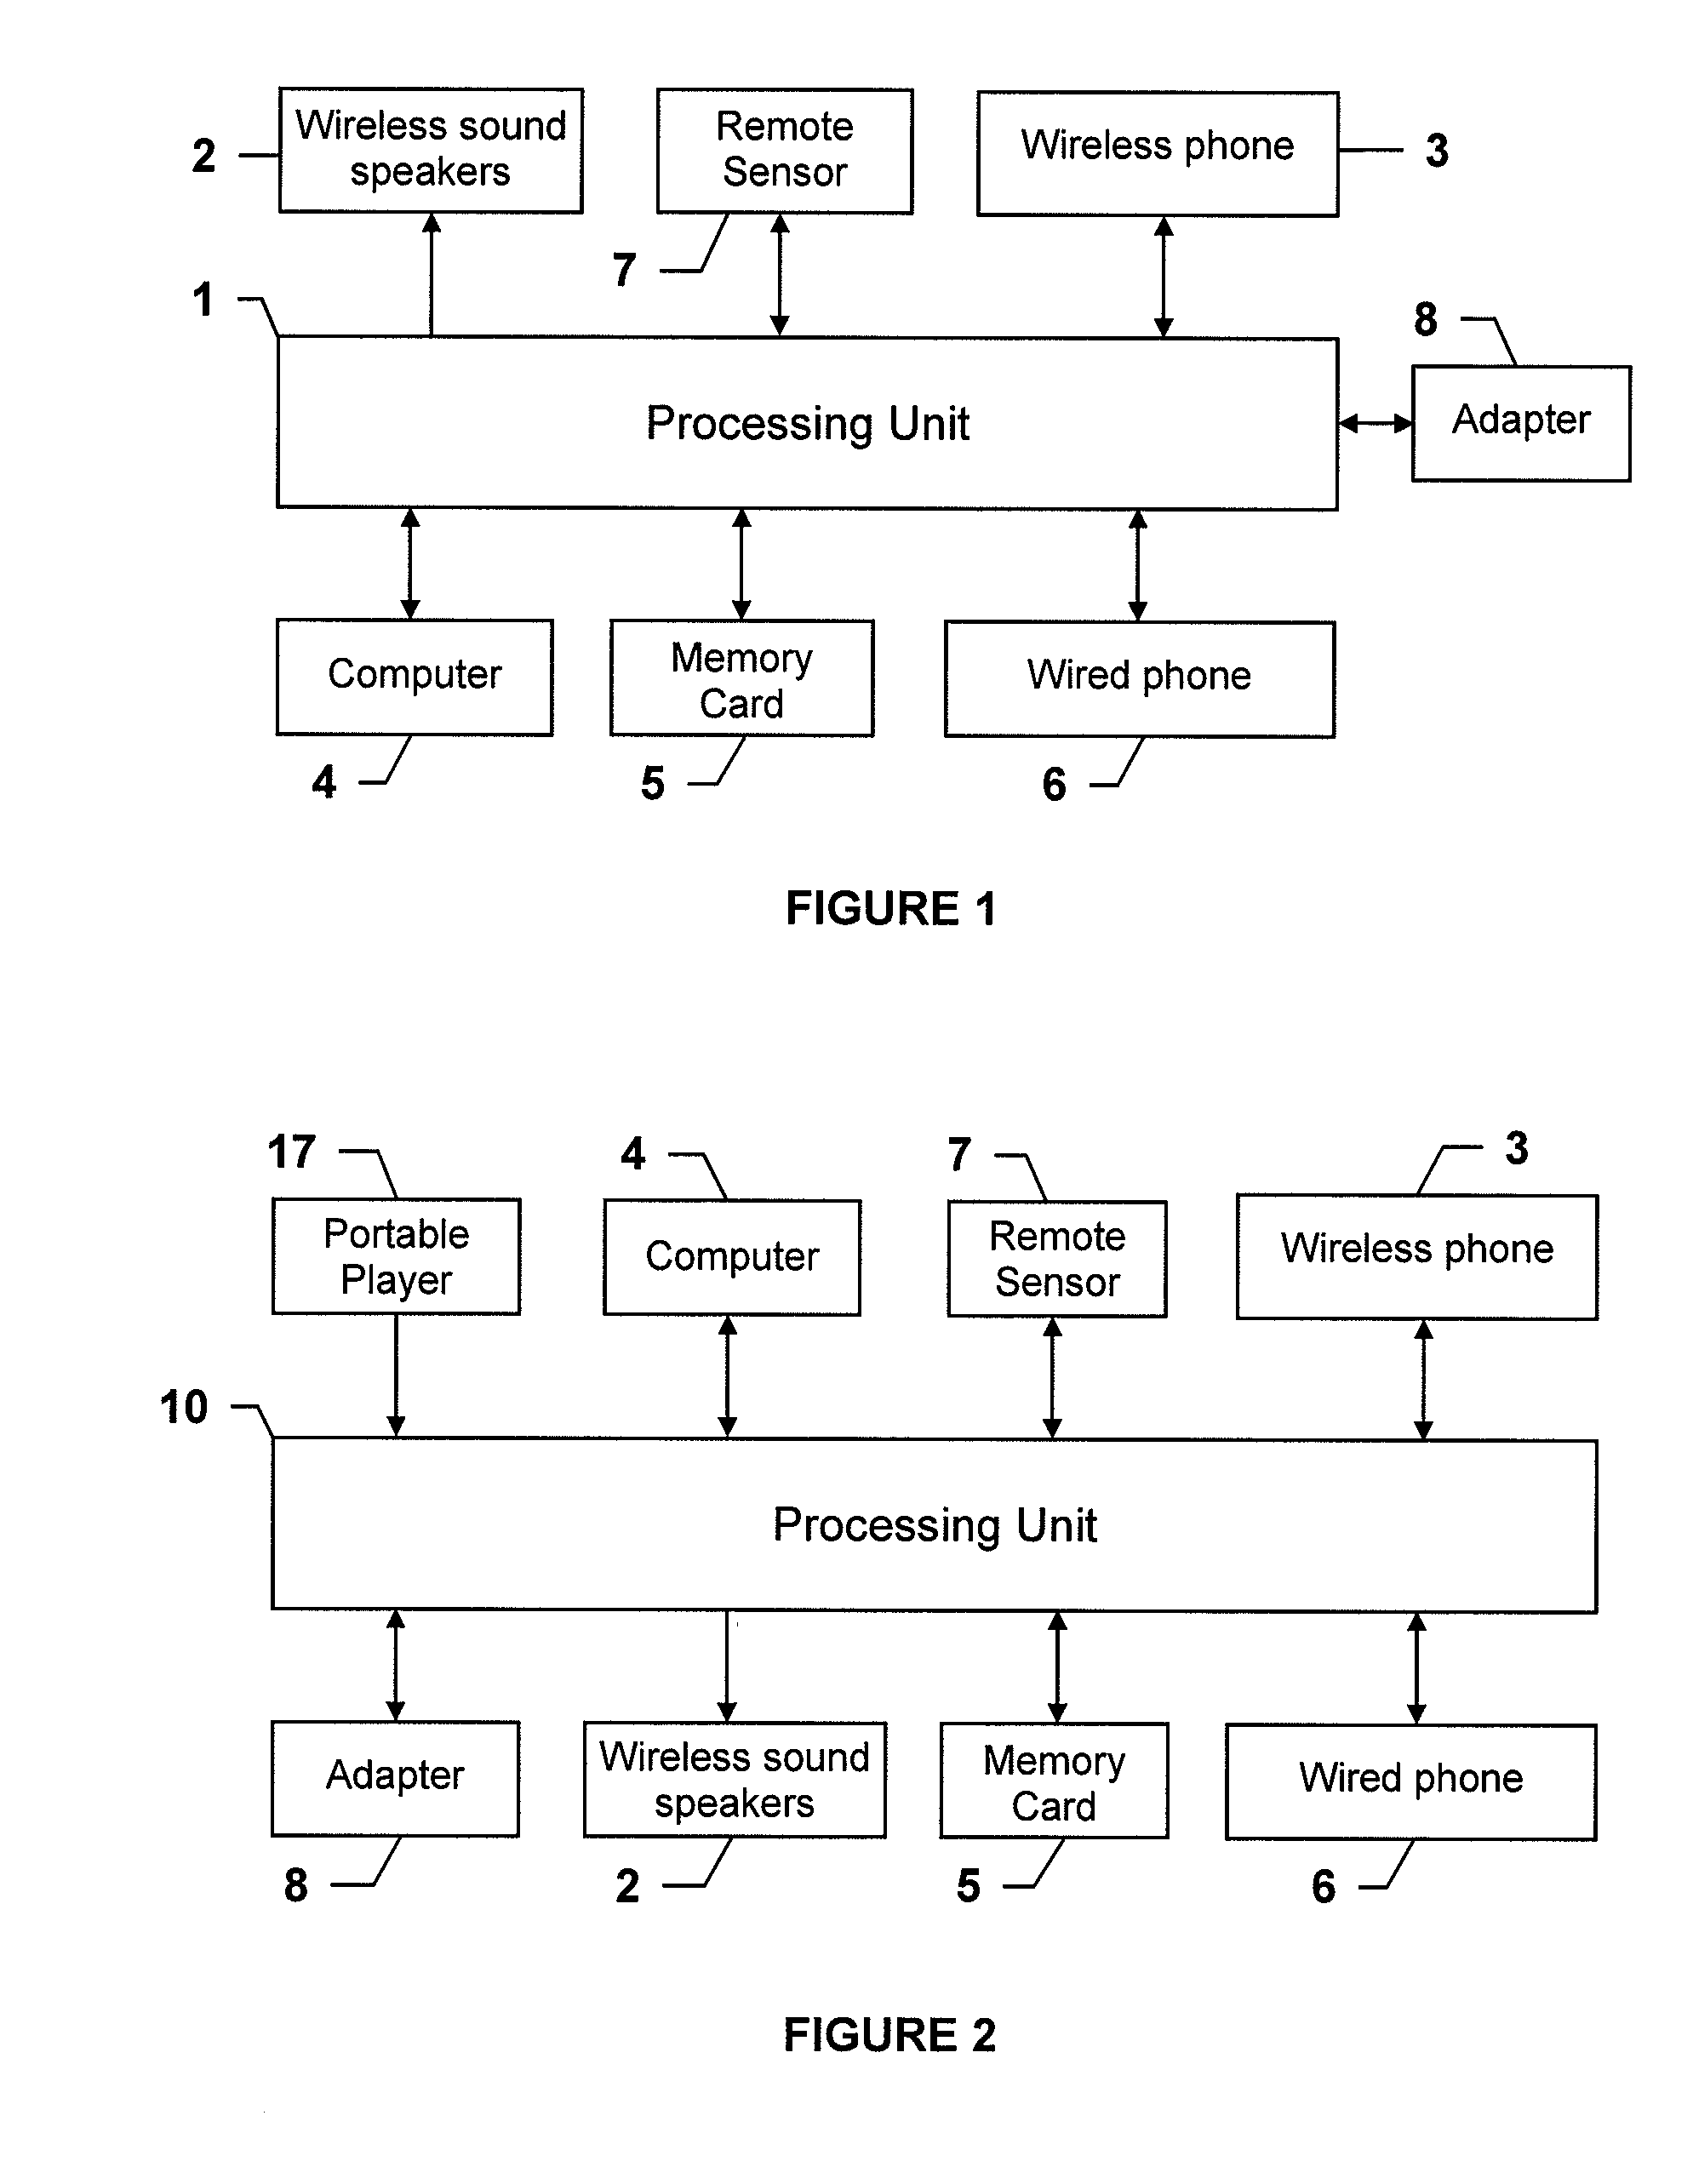 Electronic device for the production, playing, accompaniment and evaluation of sounds